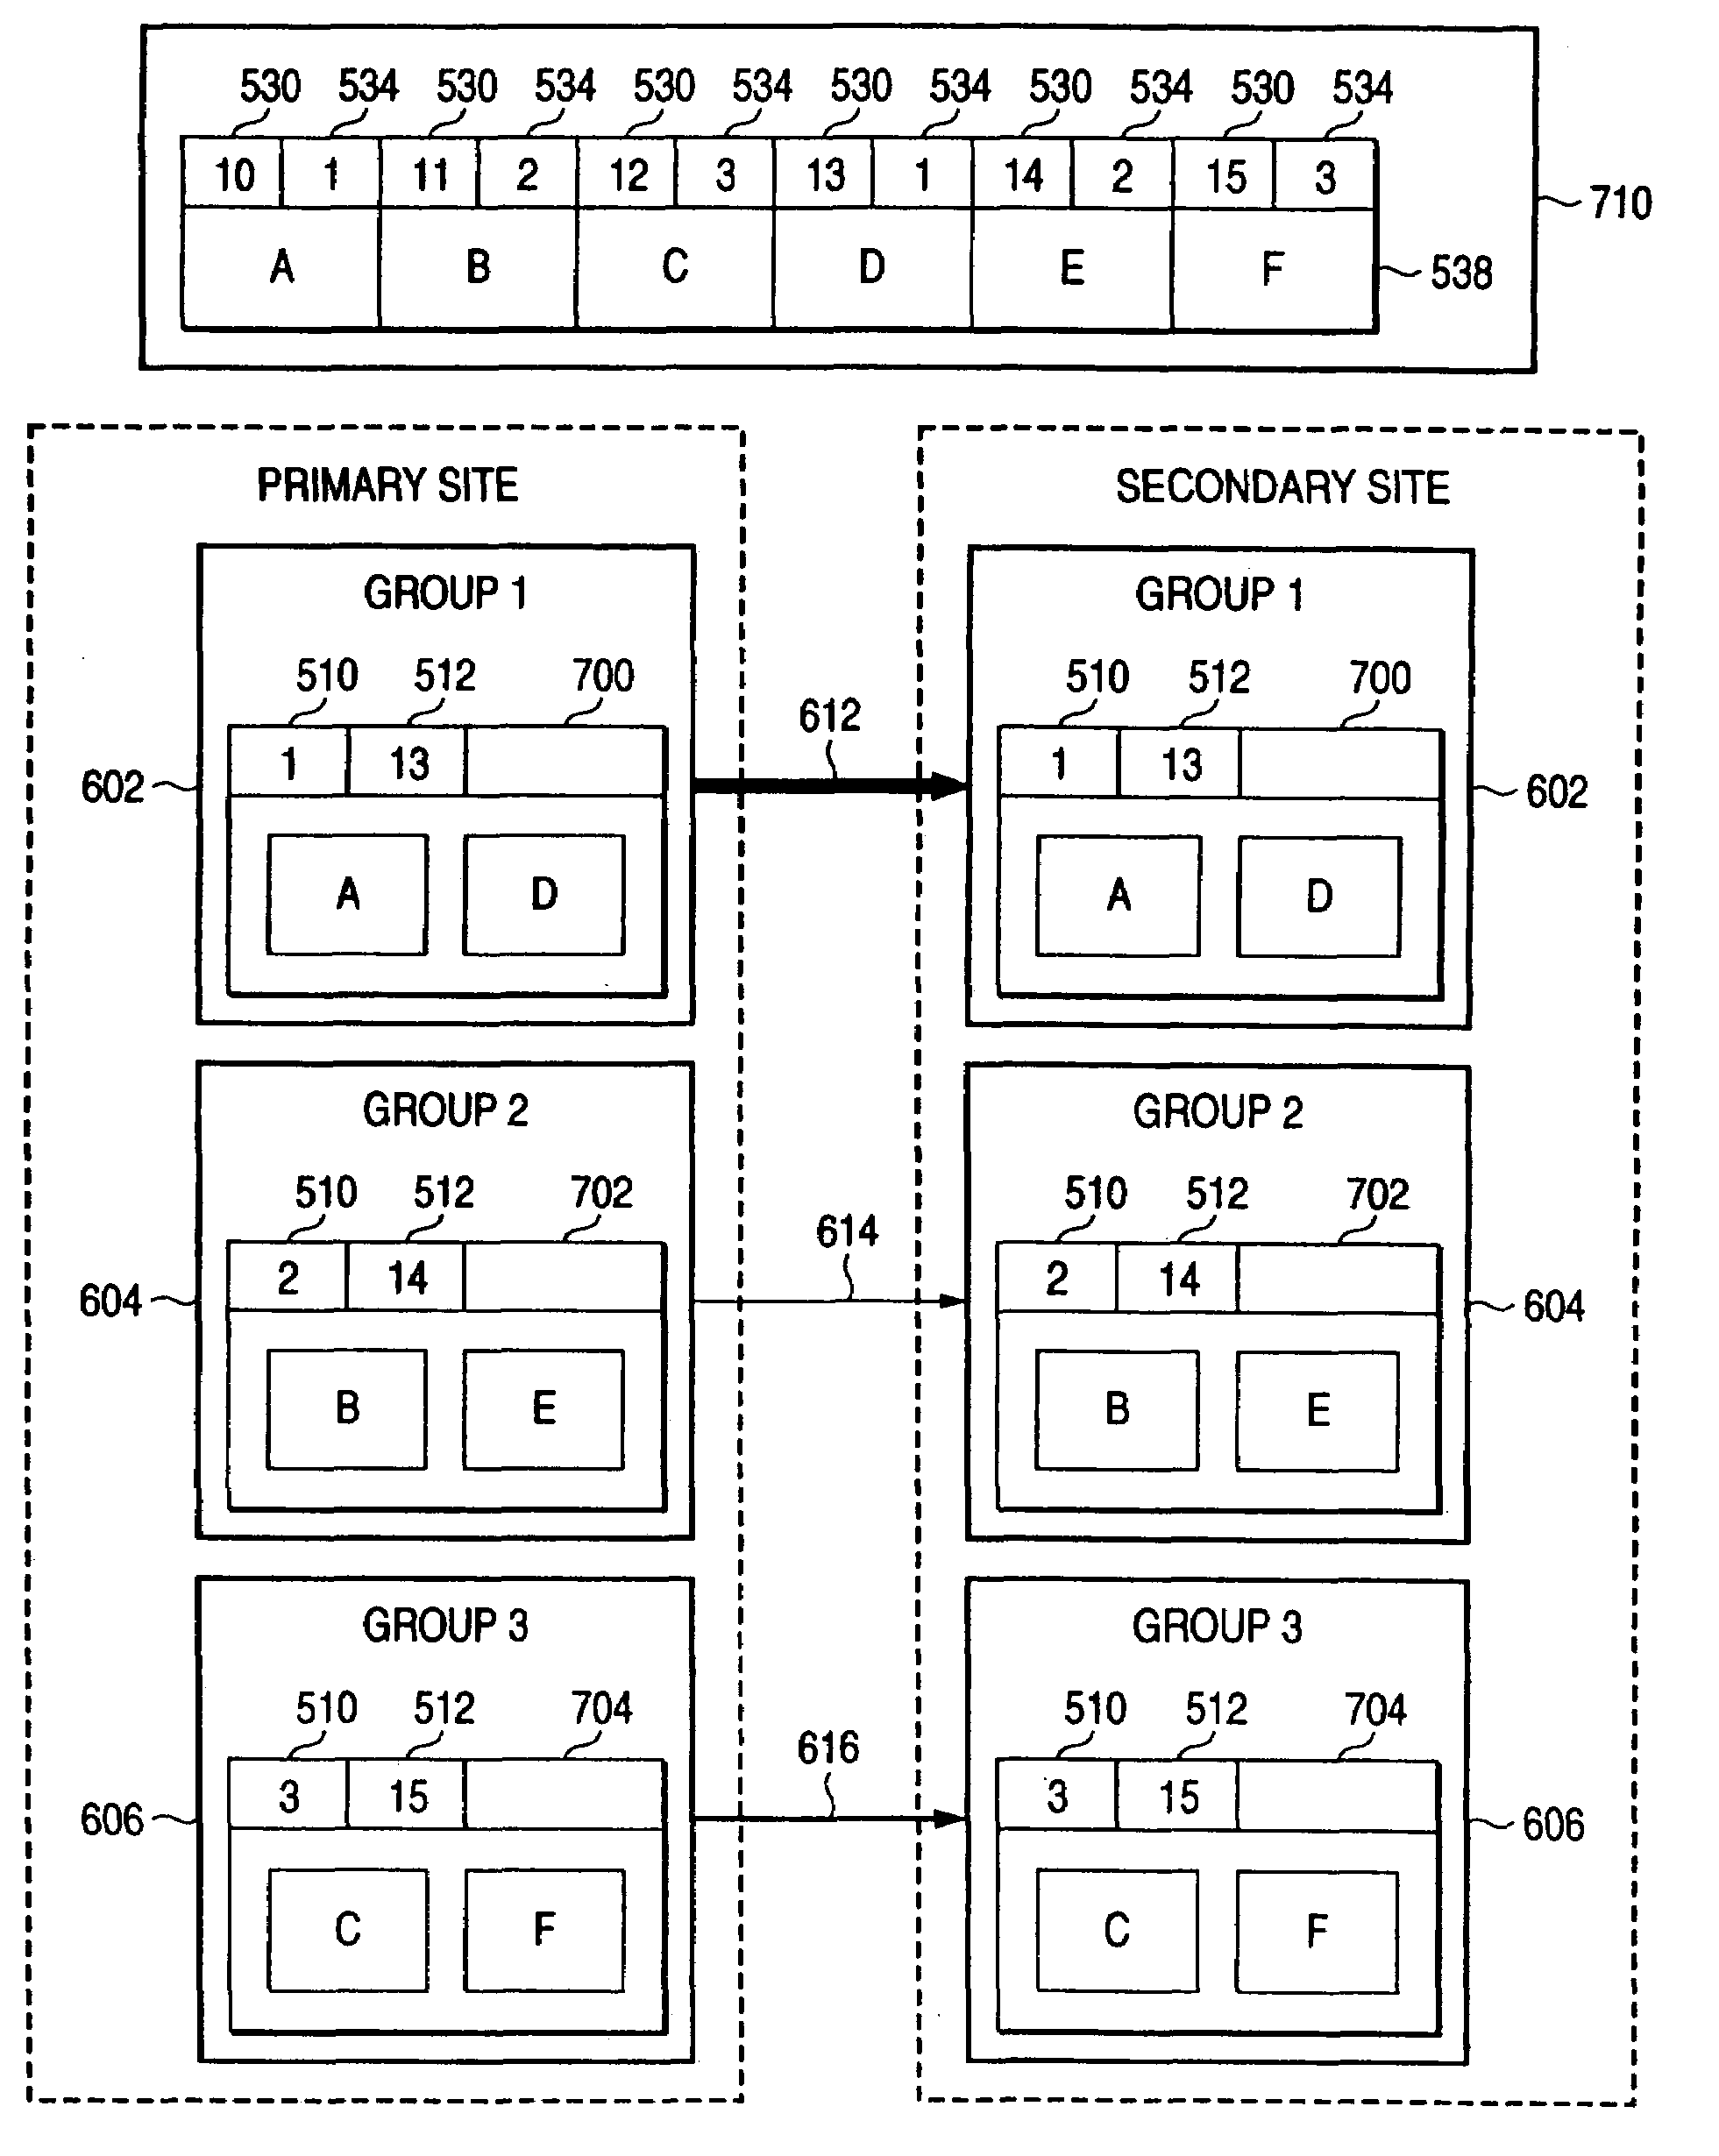 Computer system for recovering data based on priority of the data